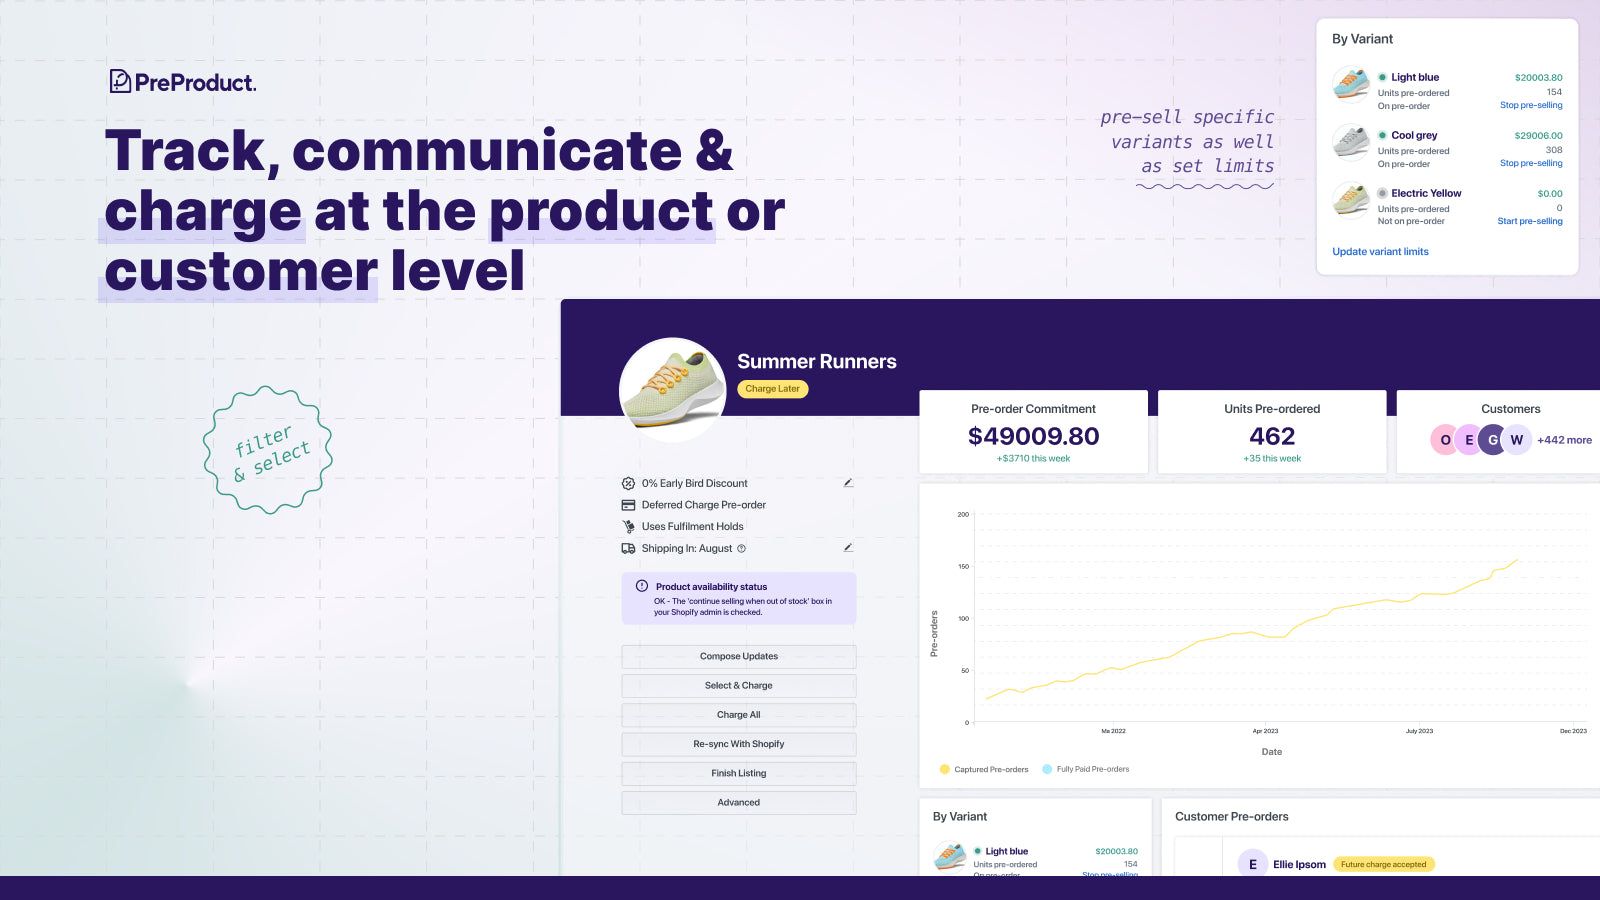 Track, communicate & charge at the product or customer level